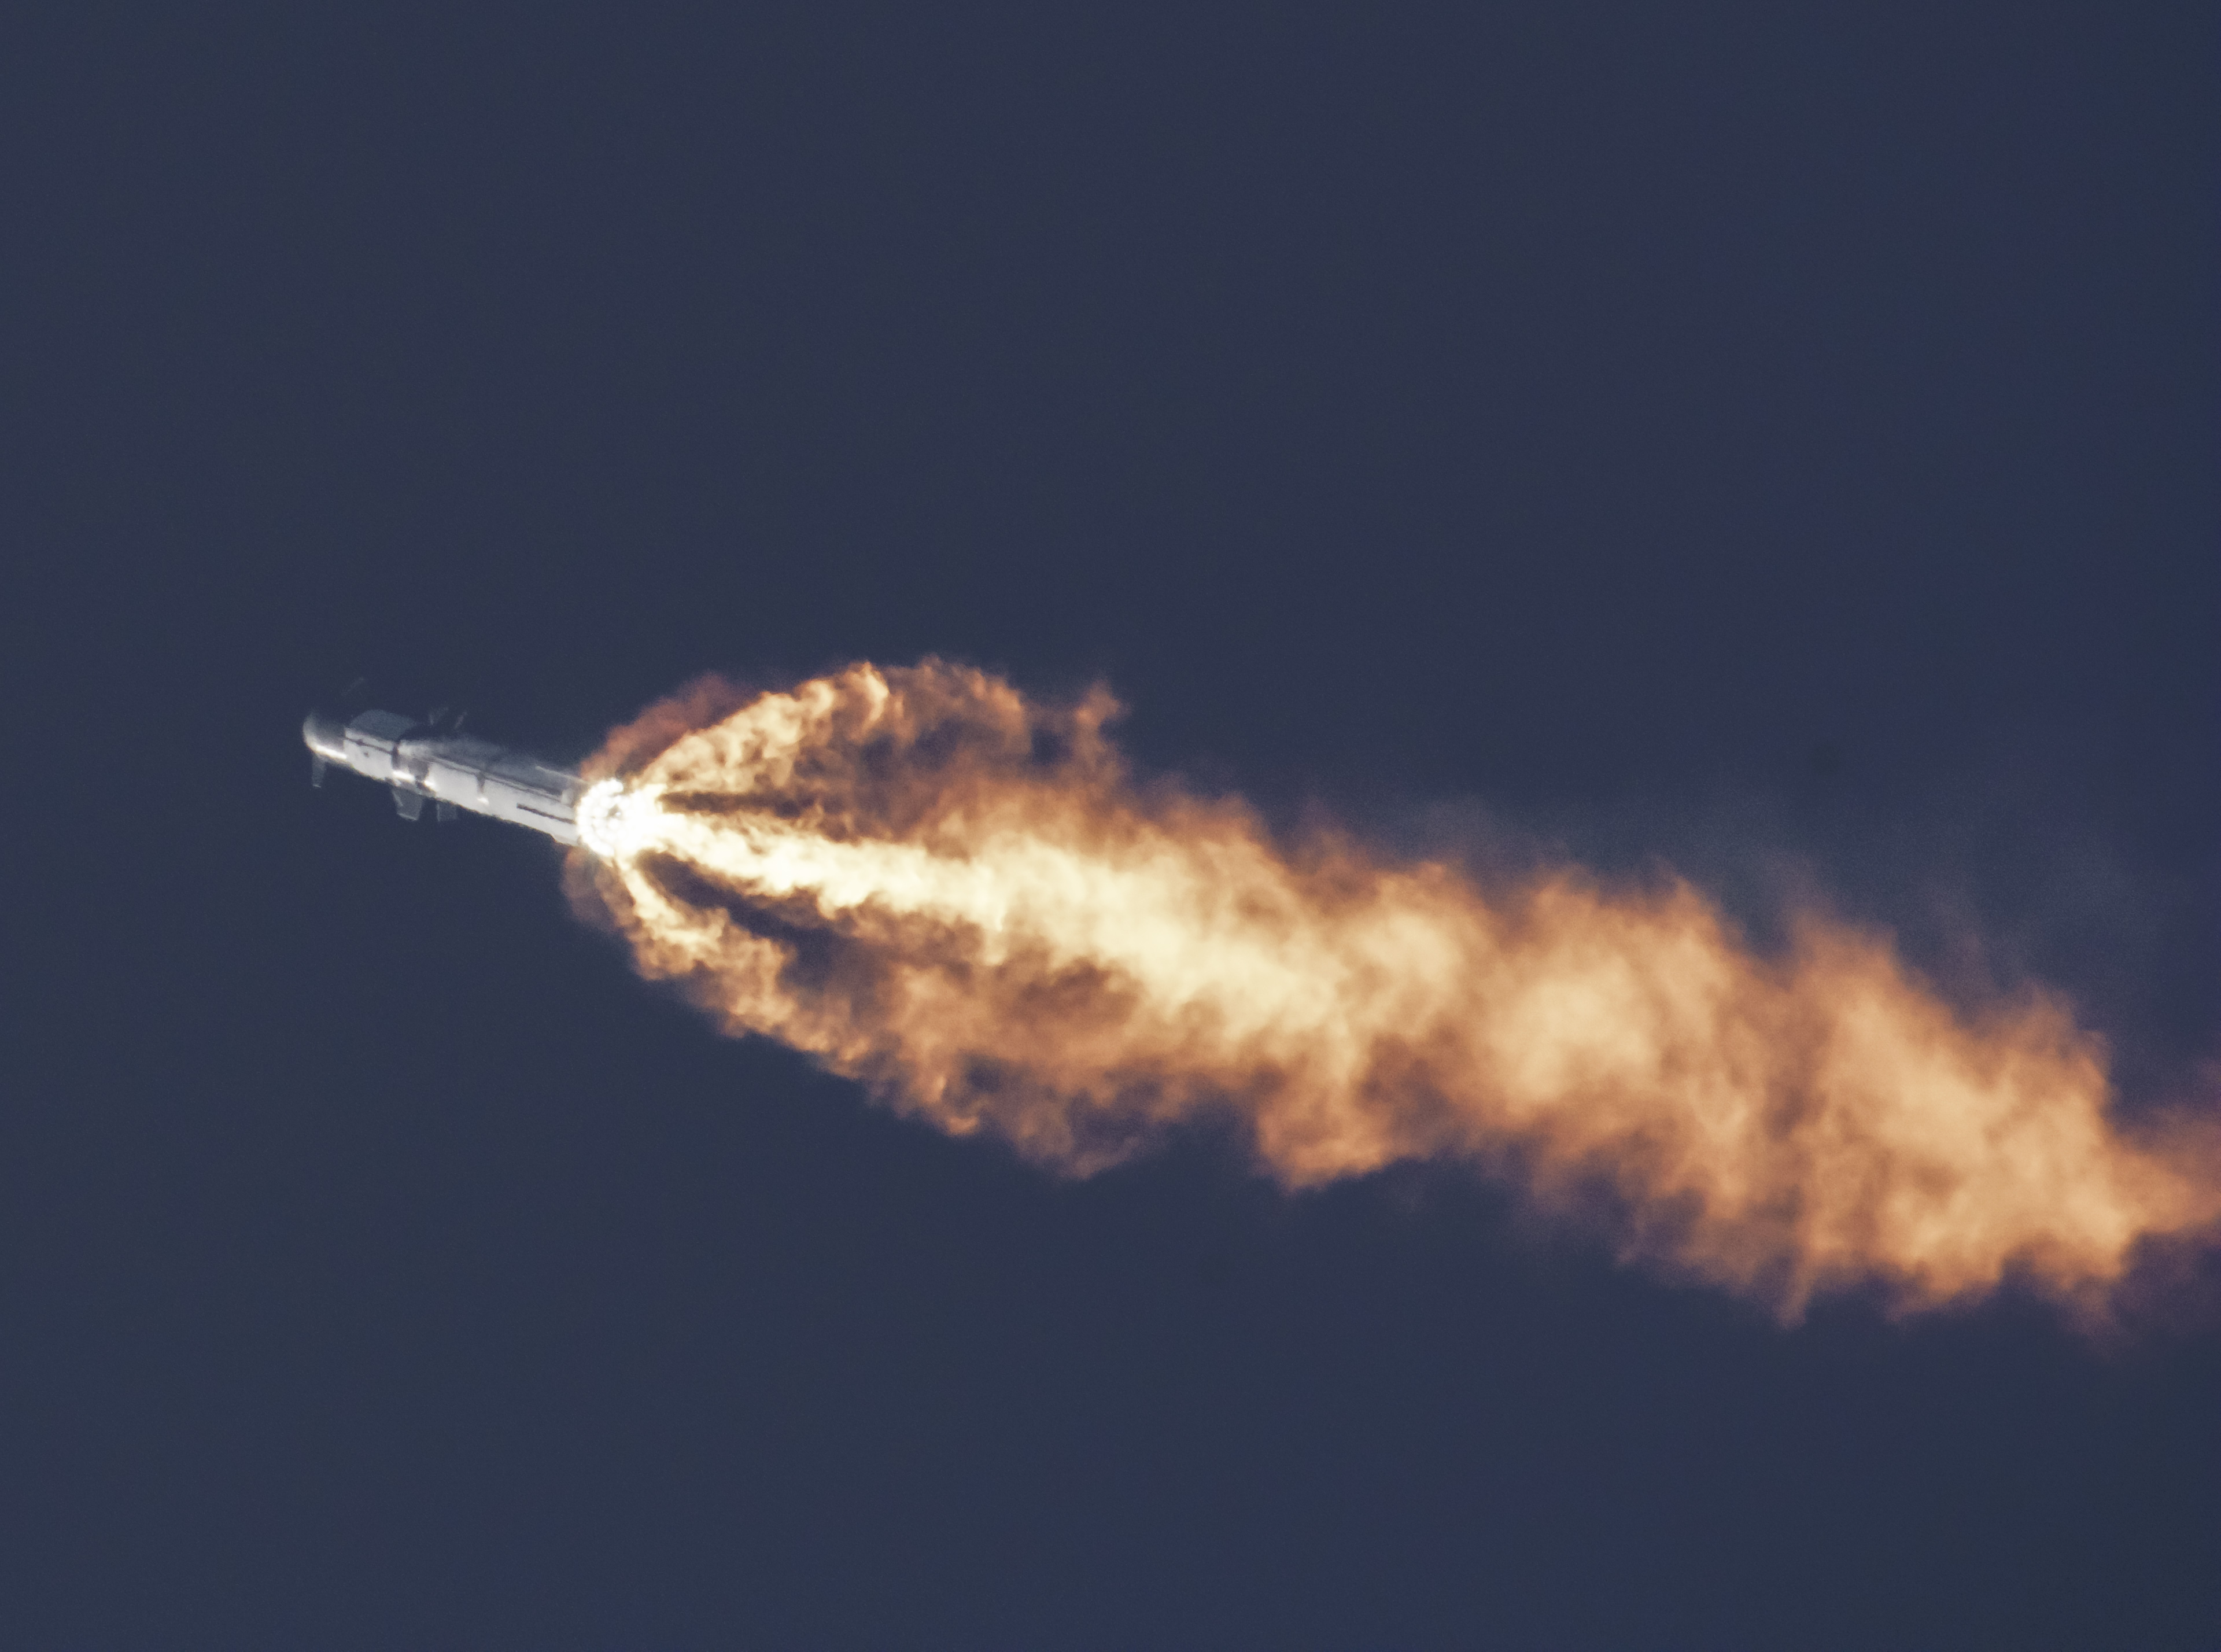 SpaceX Starship's explosive test flight: What we saw